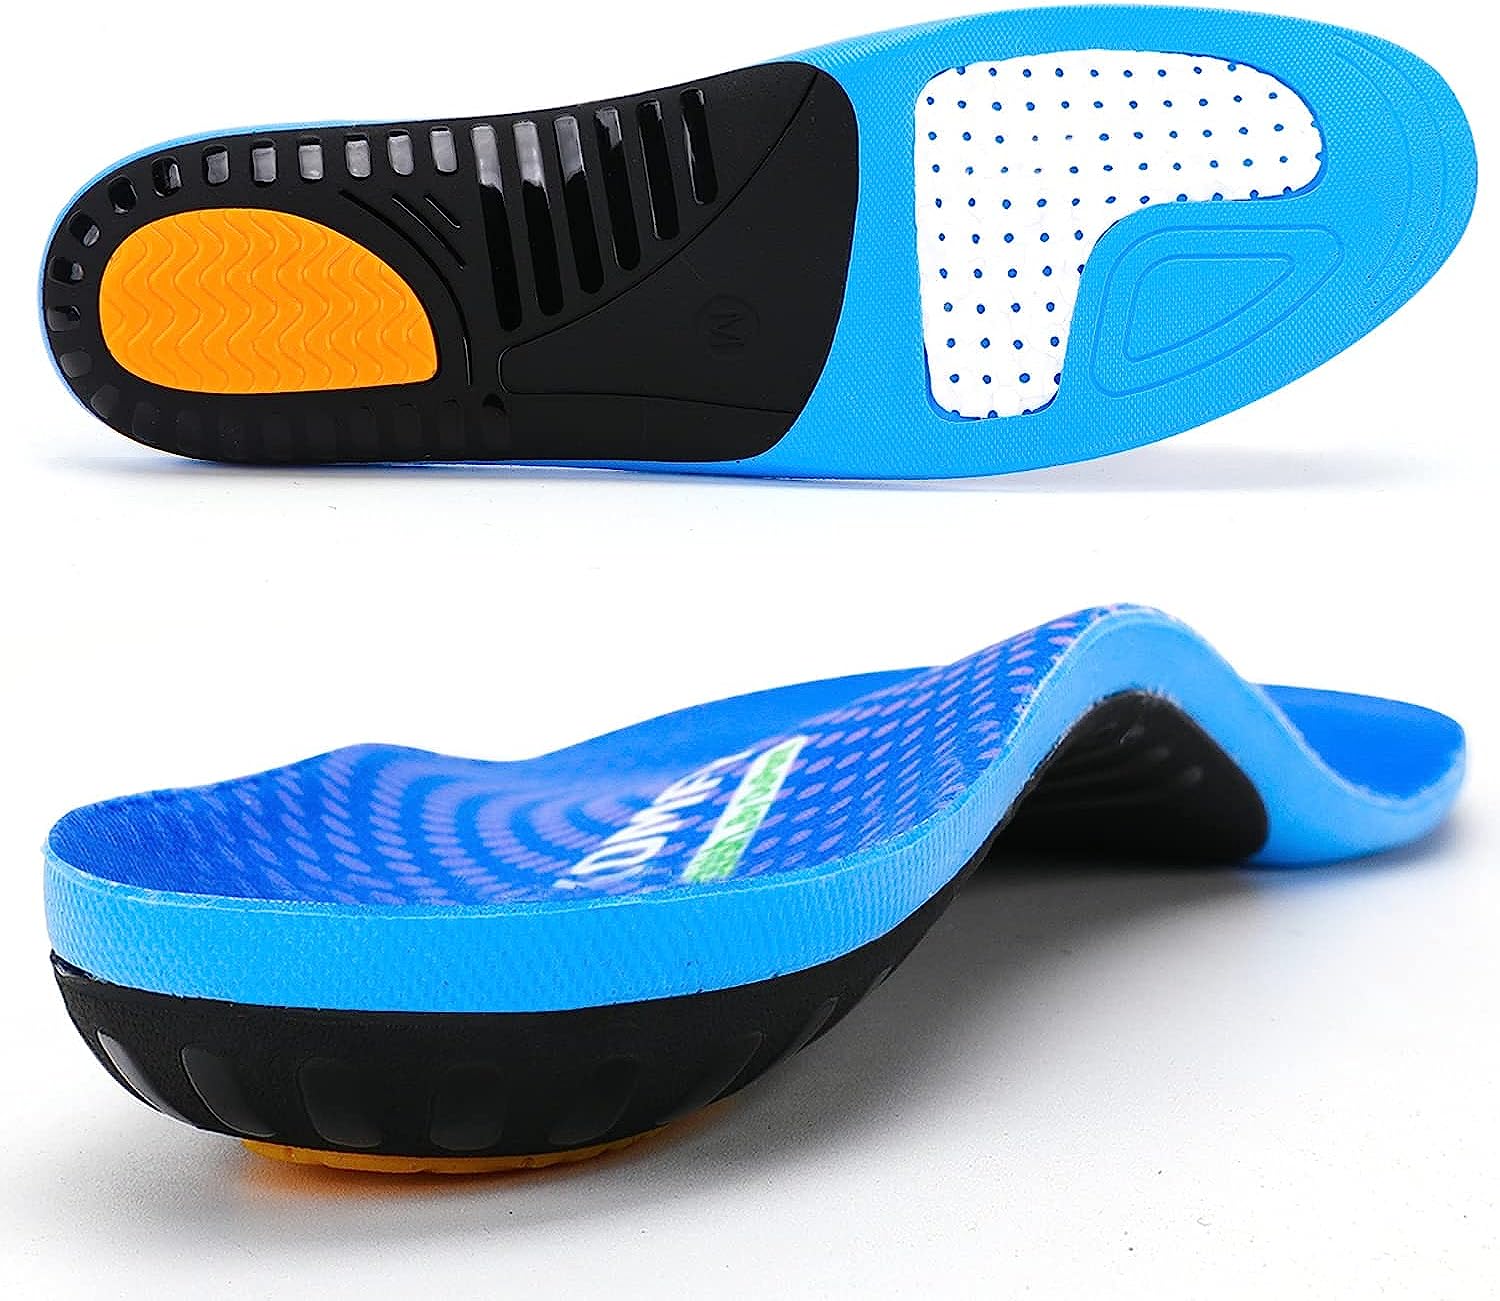 Walkomfy Standing All Day Plantar Fasciitis Insoles [...]